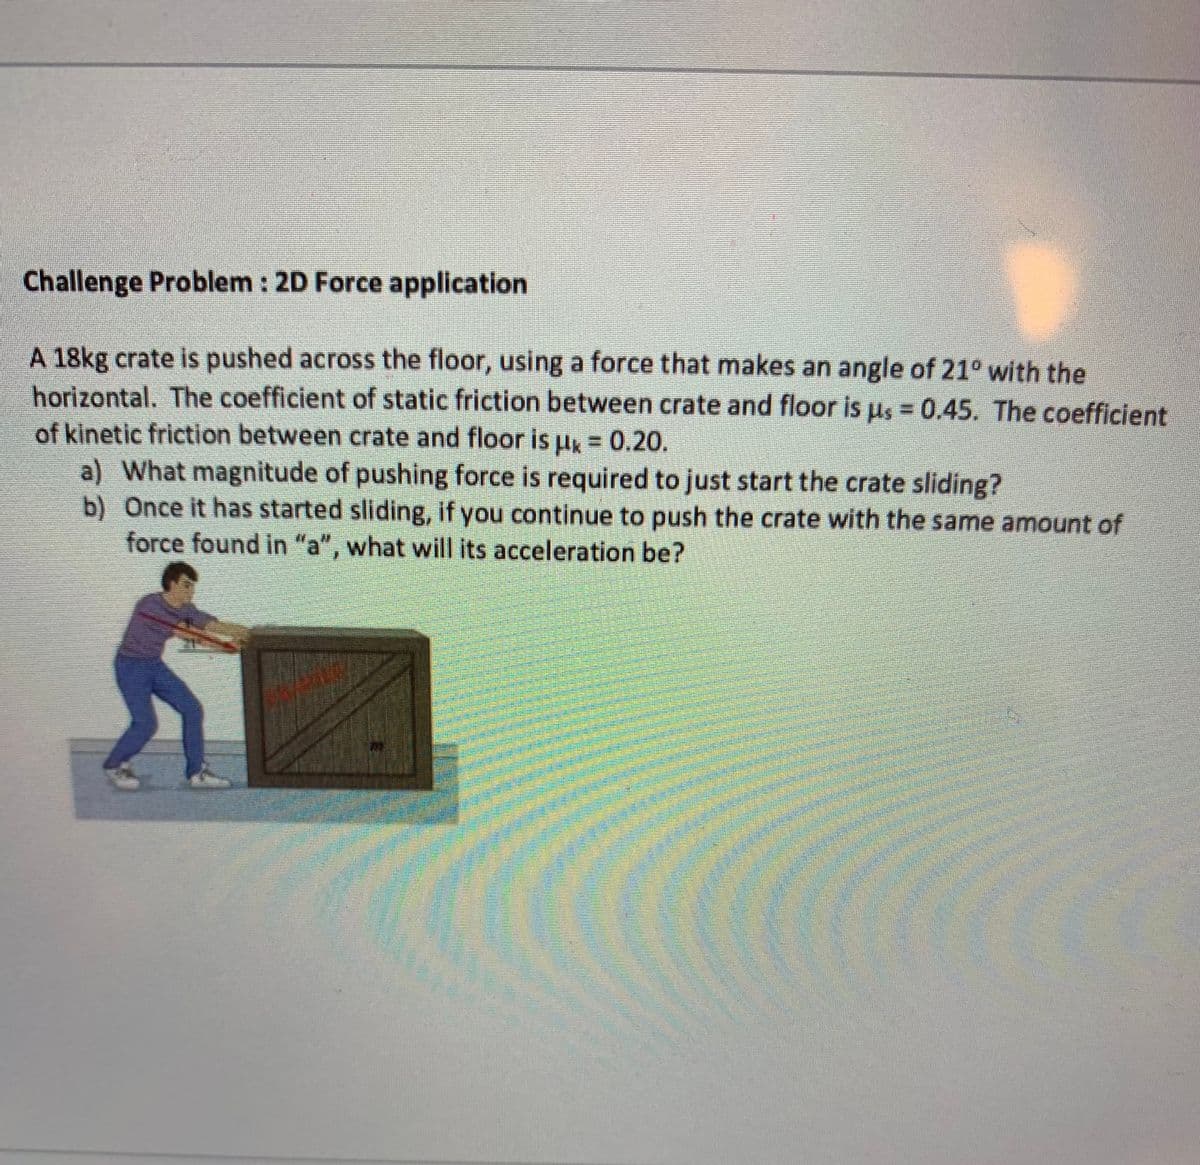 Challenge Problem : 2D Force application
A 18kg crate is pushed across the floor, using a force that makes an angle of 21° with the
horizontal. The coefficient of static friction between crate and floor is us = 0.45. The coefficient
of kinetic friction between crate and floor is uk = 0.20.
a) What magnitude of pushing force is required to just start the crate sliding?
b) Once it has started sliding, if you continue to push the crate with the same amount of
force found in "a", what will its acceleration be?
Cla
